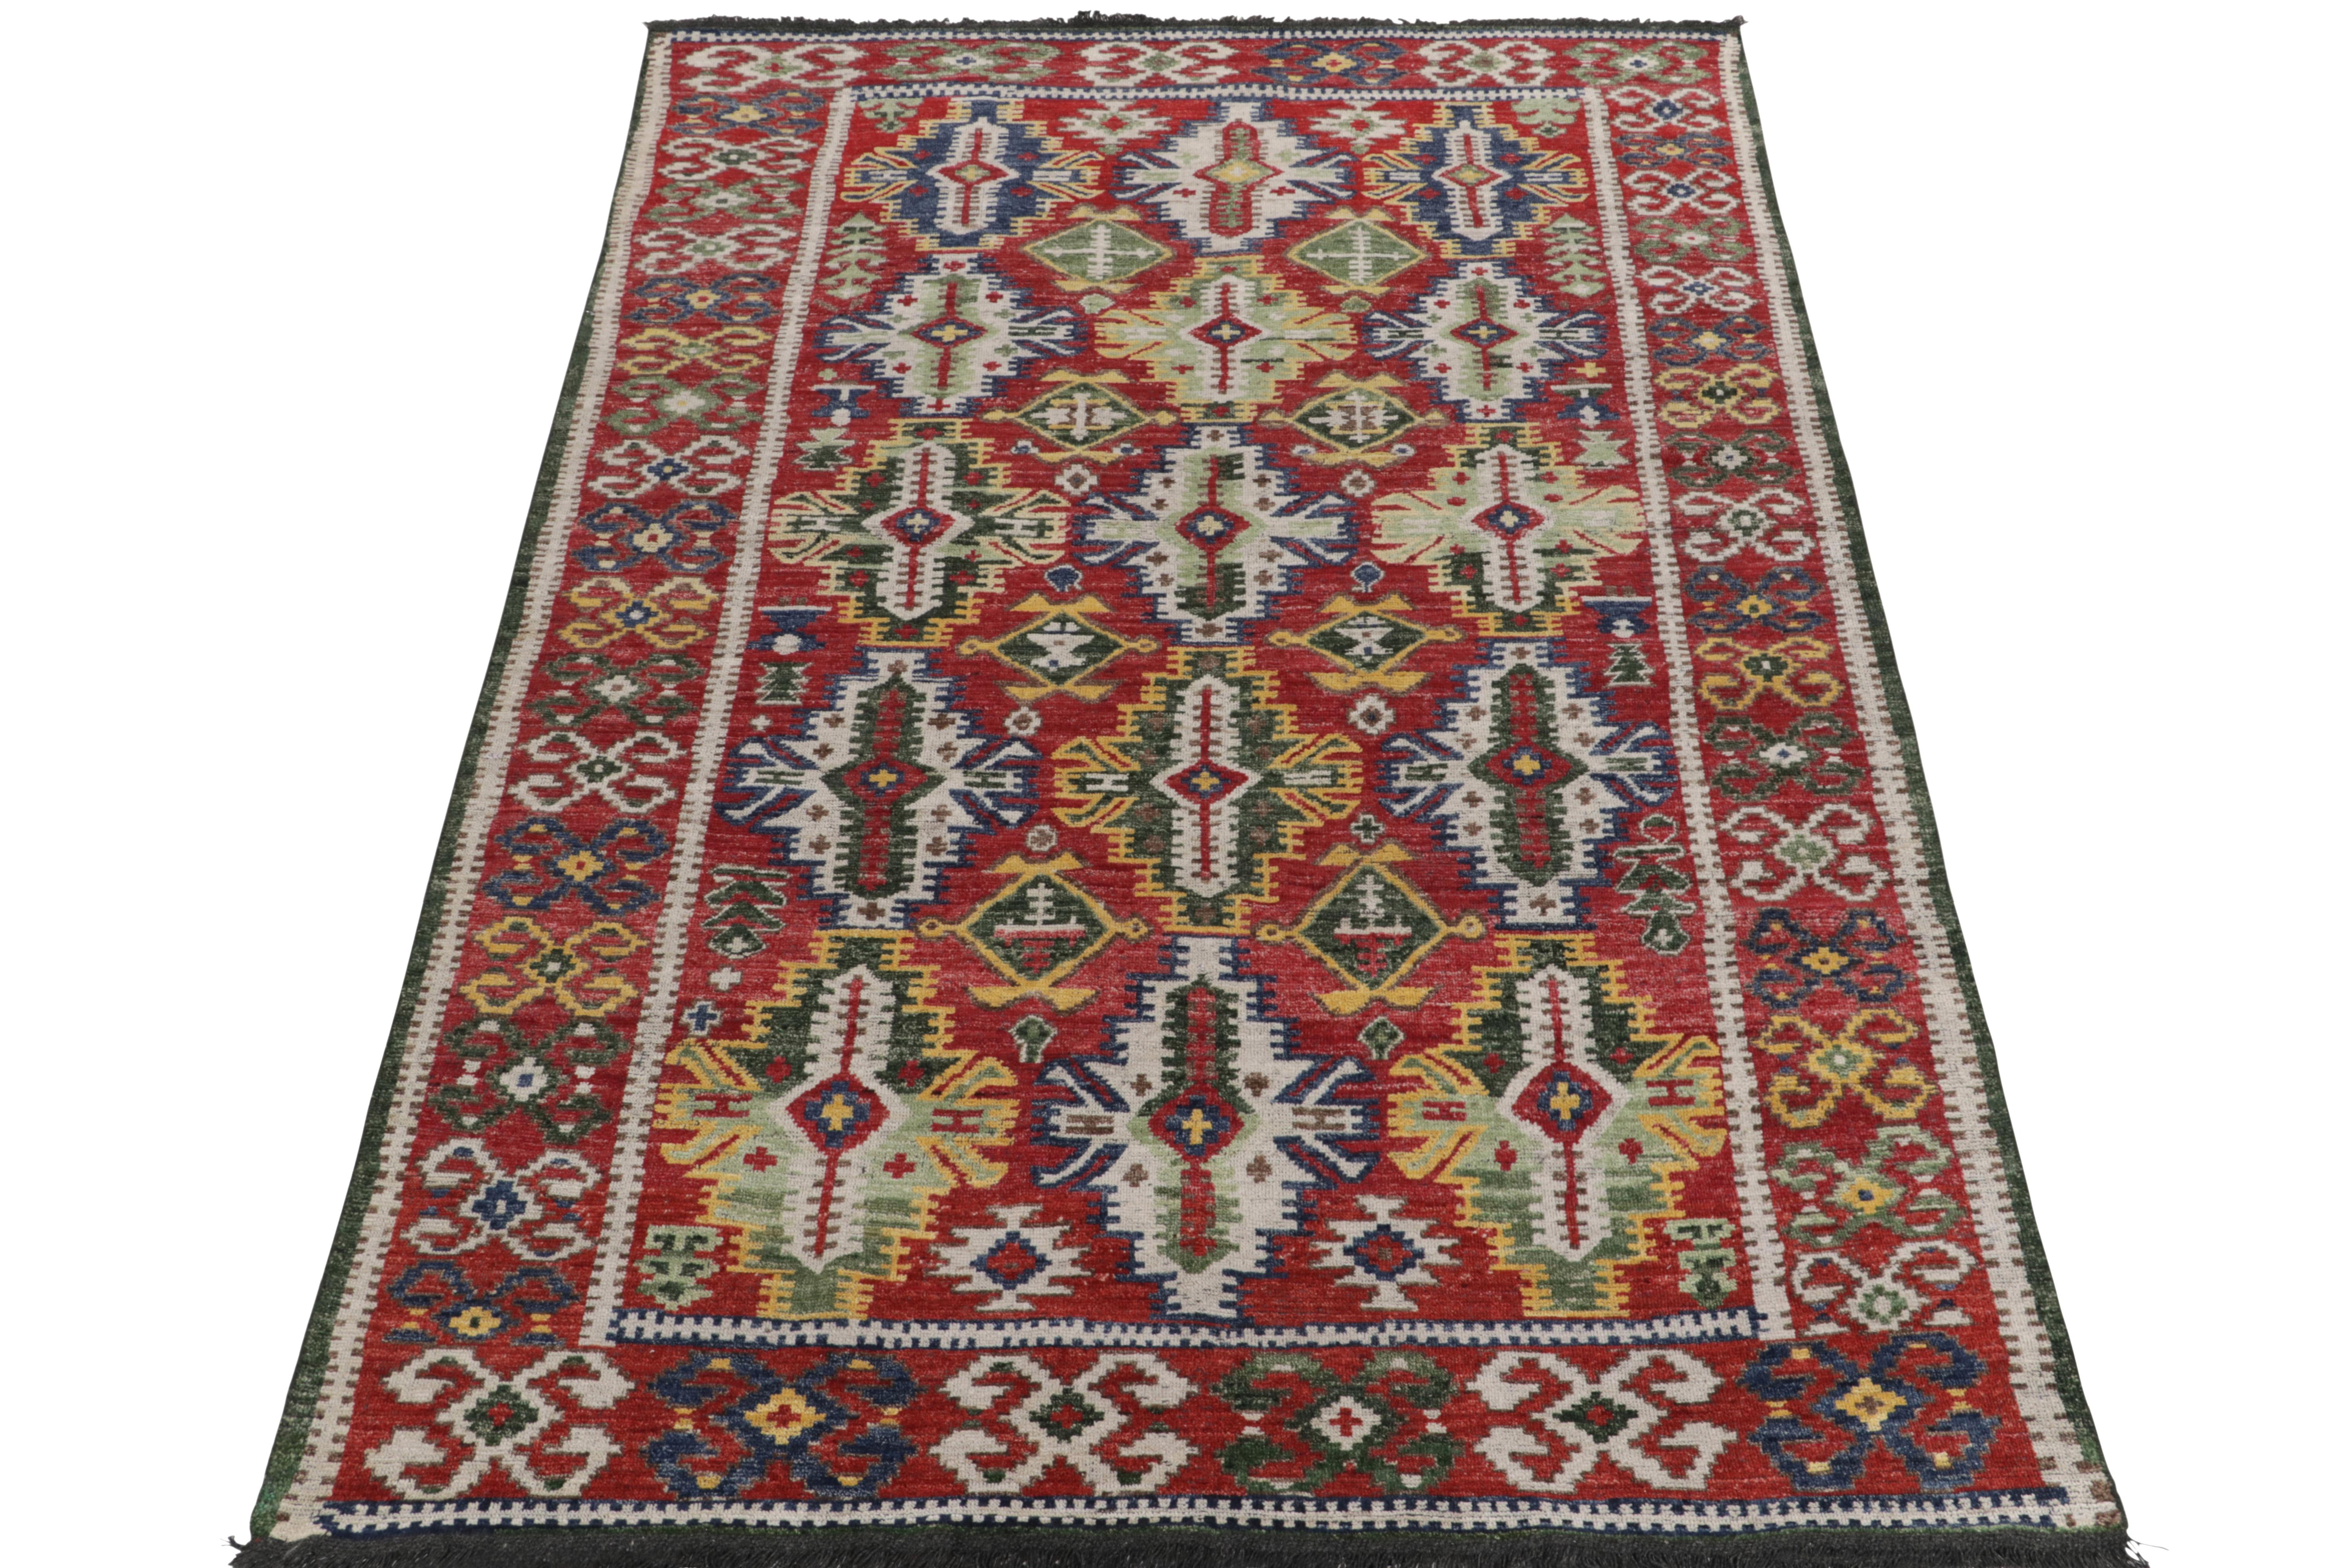 Hand-knotted in fine wool, this 8 x 11 rug from our Burano collection beautifully adapts the sensibility of antique caucasian kilims to tasteful pile. The splendid vision revels in tribal patterns playing joyfully in bright red, yellow, deep blue,